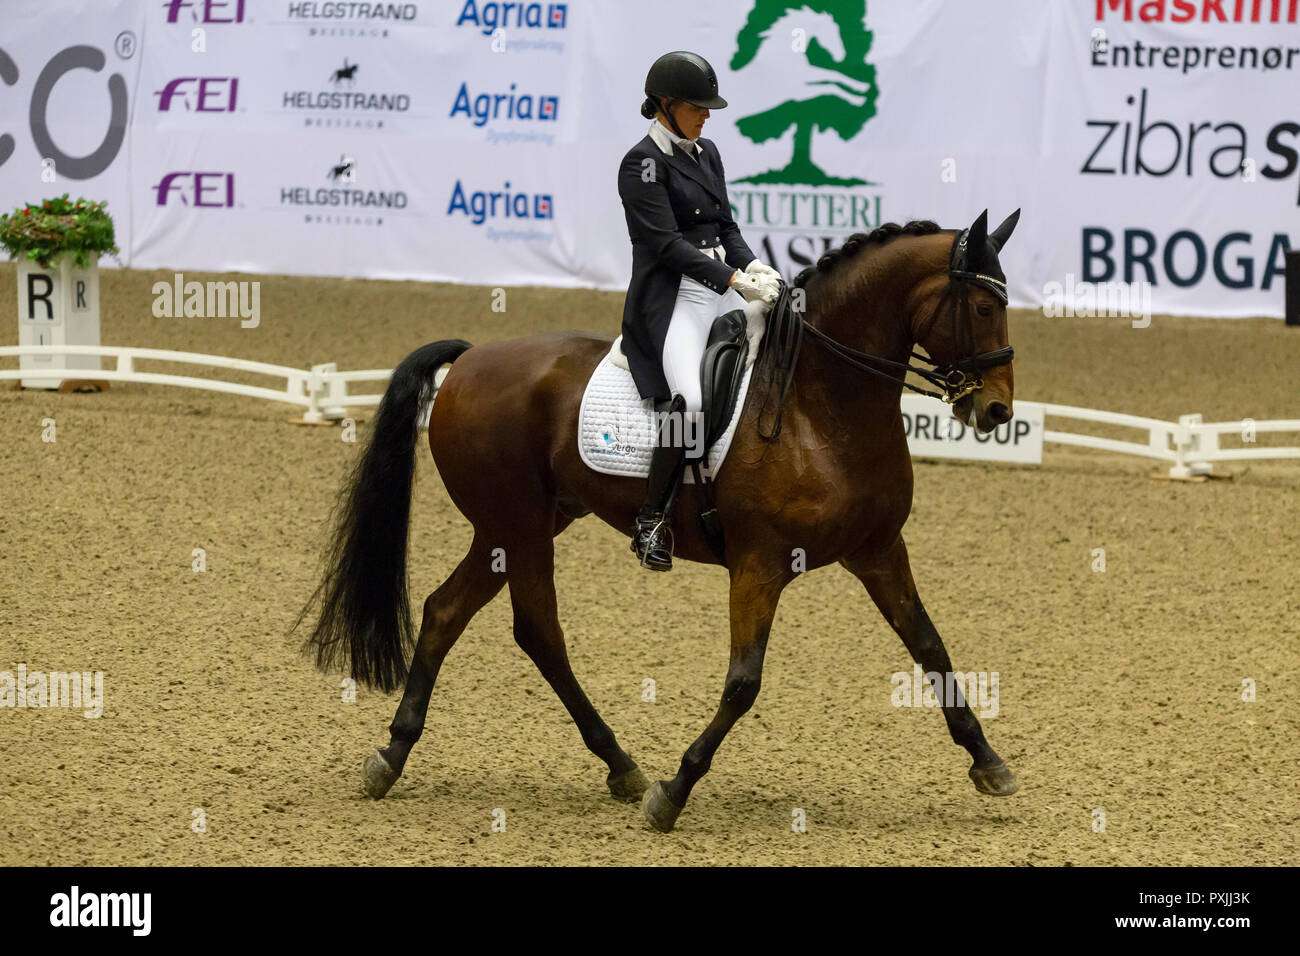 Herning, Denmark. 21st October, 2018. Sakia Maertens of Holland riding Legend of Loxley during the FEI World Cup 2018 in freestyle dressage in Denmark. Credit: OJPHOTOS/Alamy Live News Stock Photo